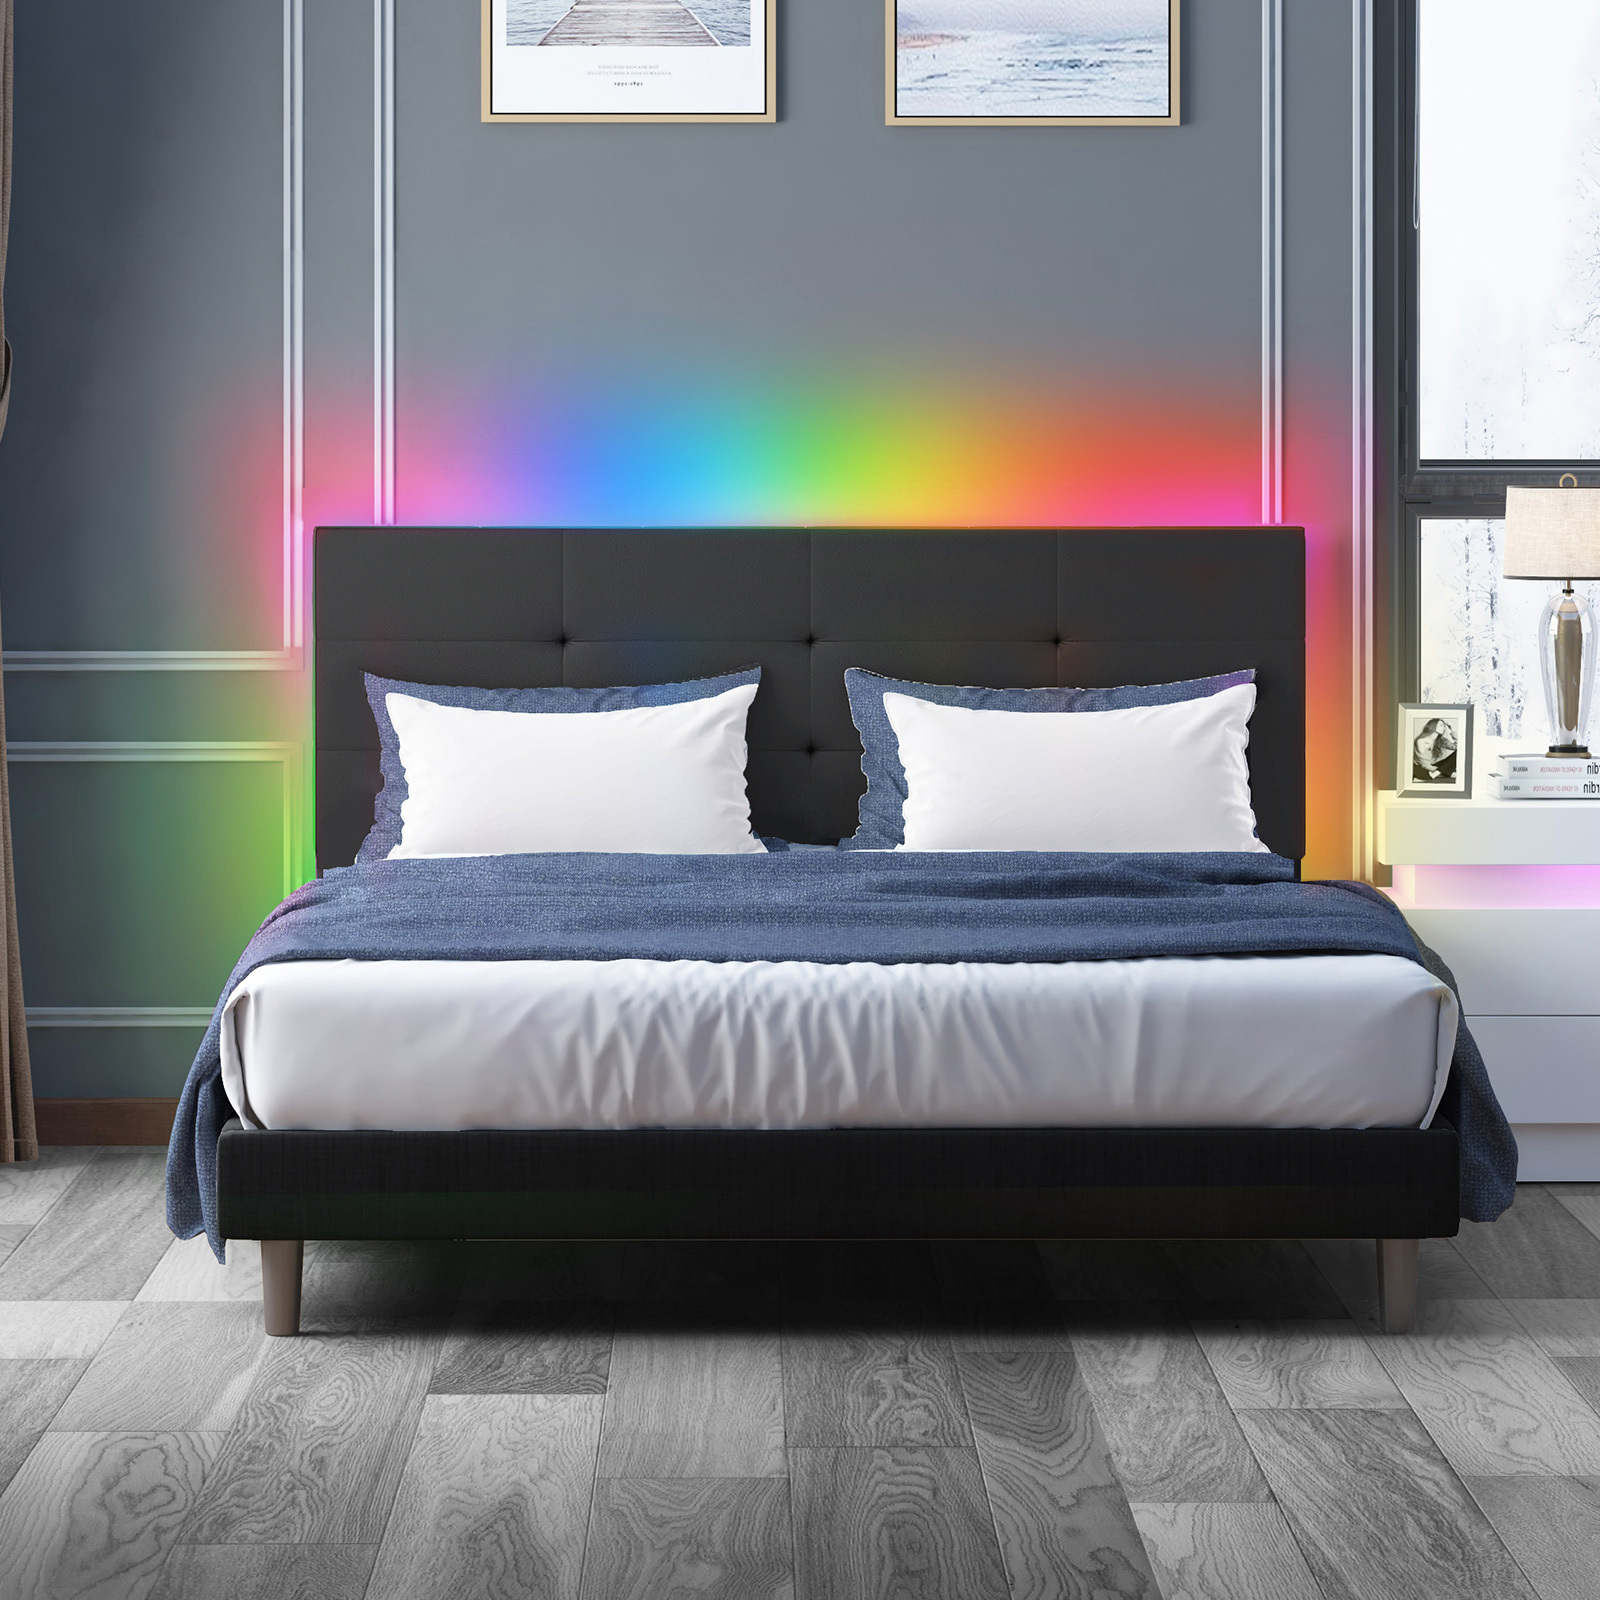 Mjkone King Size Beds with LED Headboard, RGB LED Light Controlled by Alexa or APP, Fabric Upholstered Platform//Easy Assembly No Box Spring Needed/No Mattress(King, Light Grey) - Walmart.com